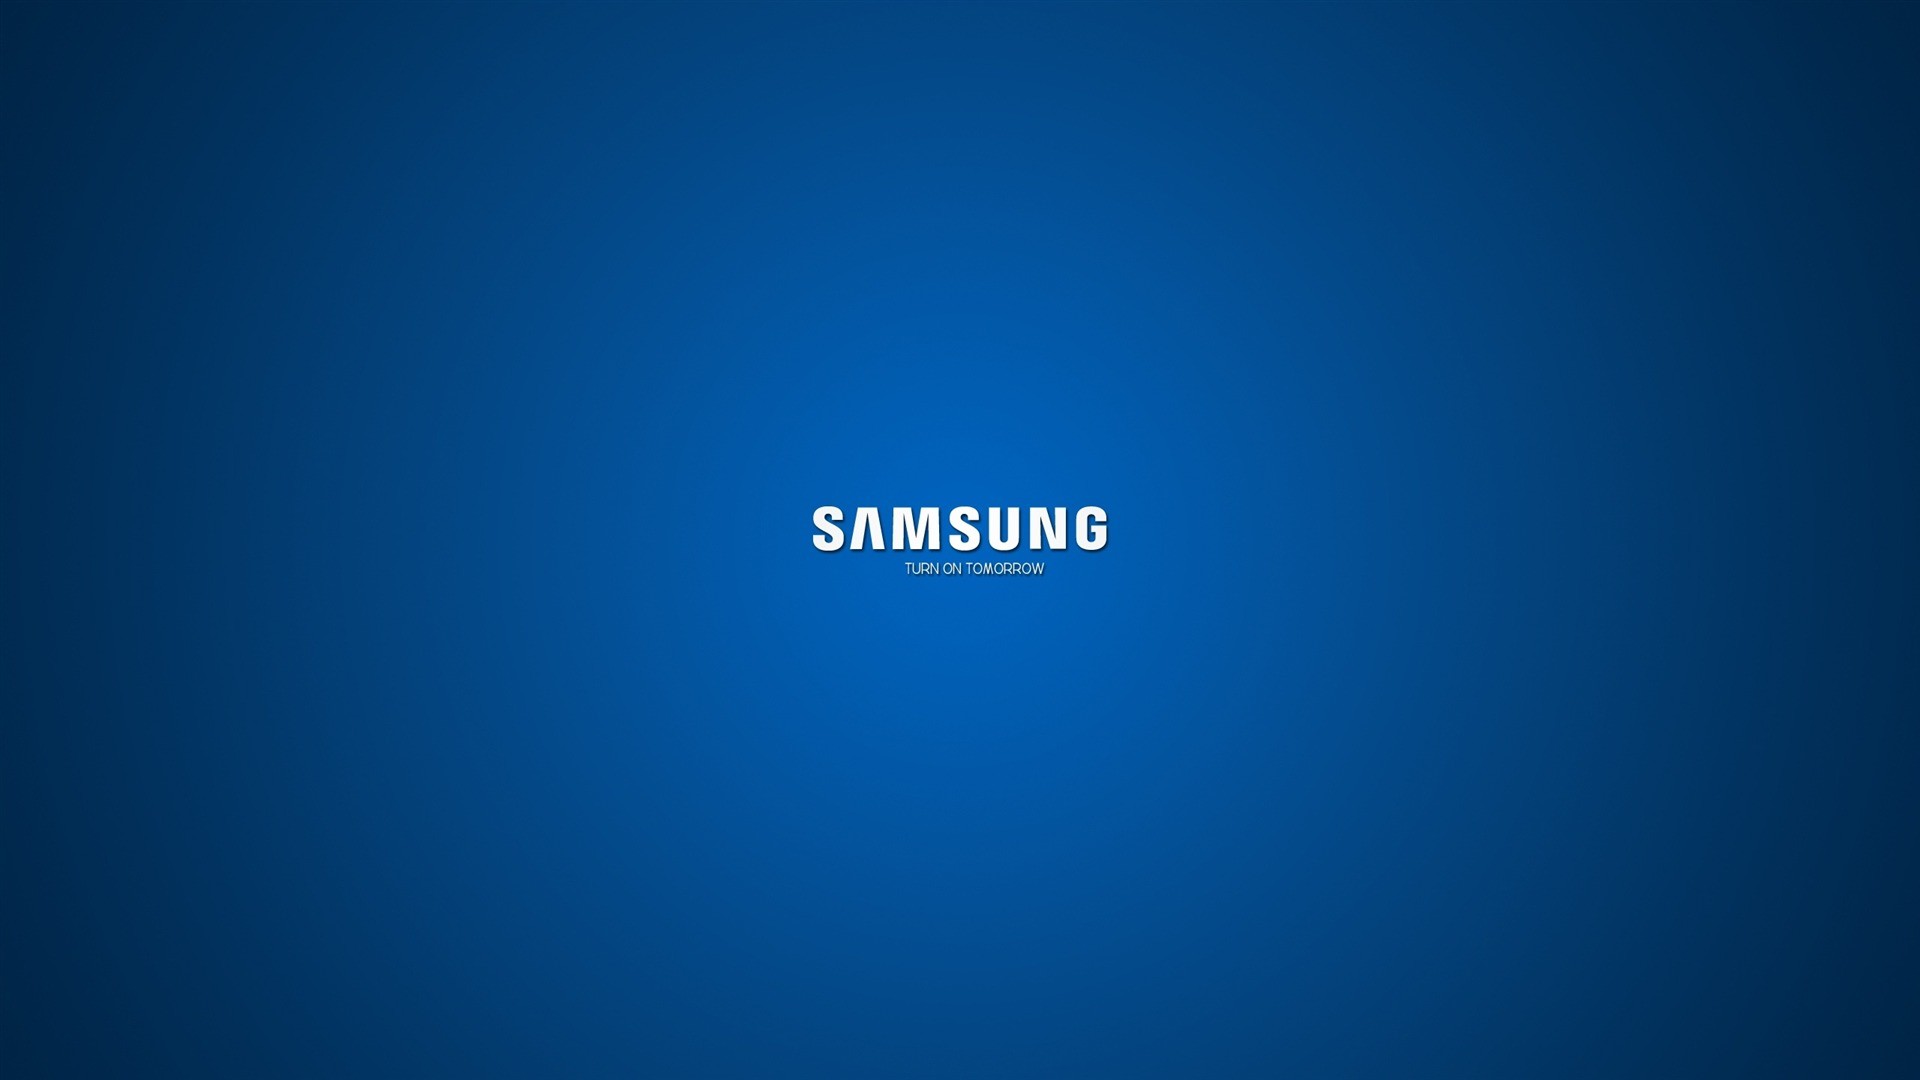 1920x1080 Download Cool Samsung Galaxy Note Smartphone Background Wallpaper 